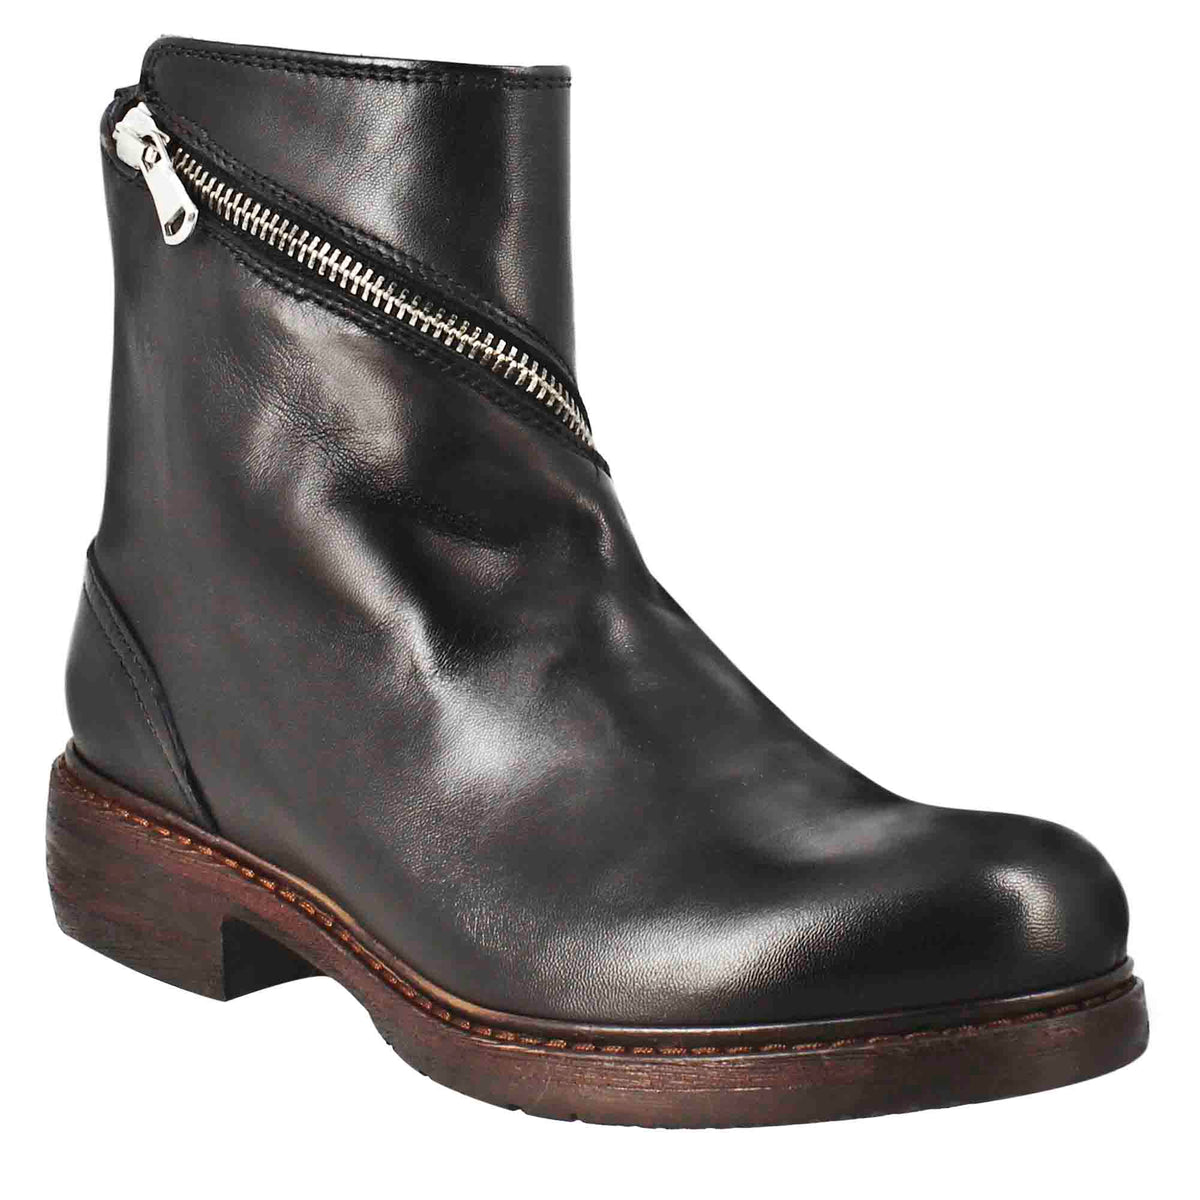 Paupa women's ankle boot in black washed leather with double zip